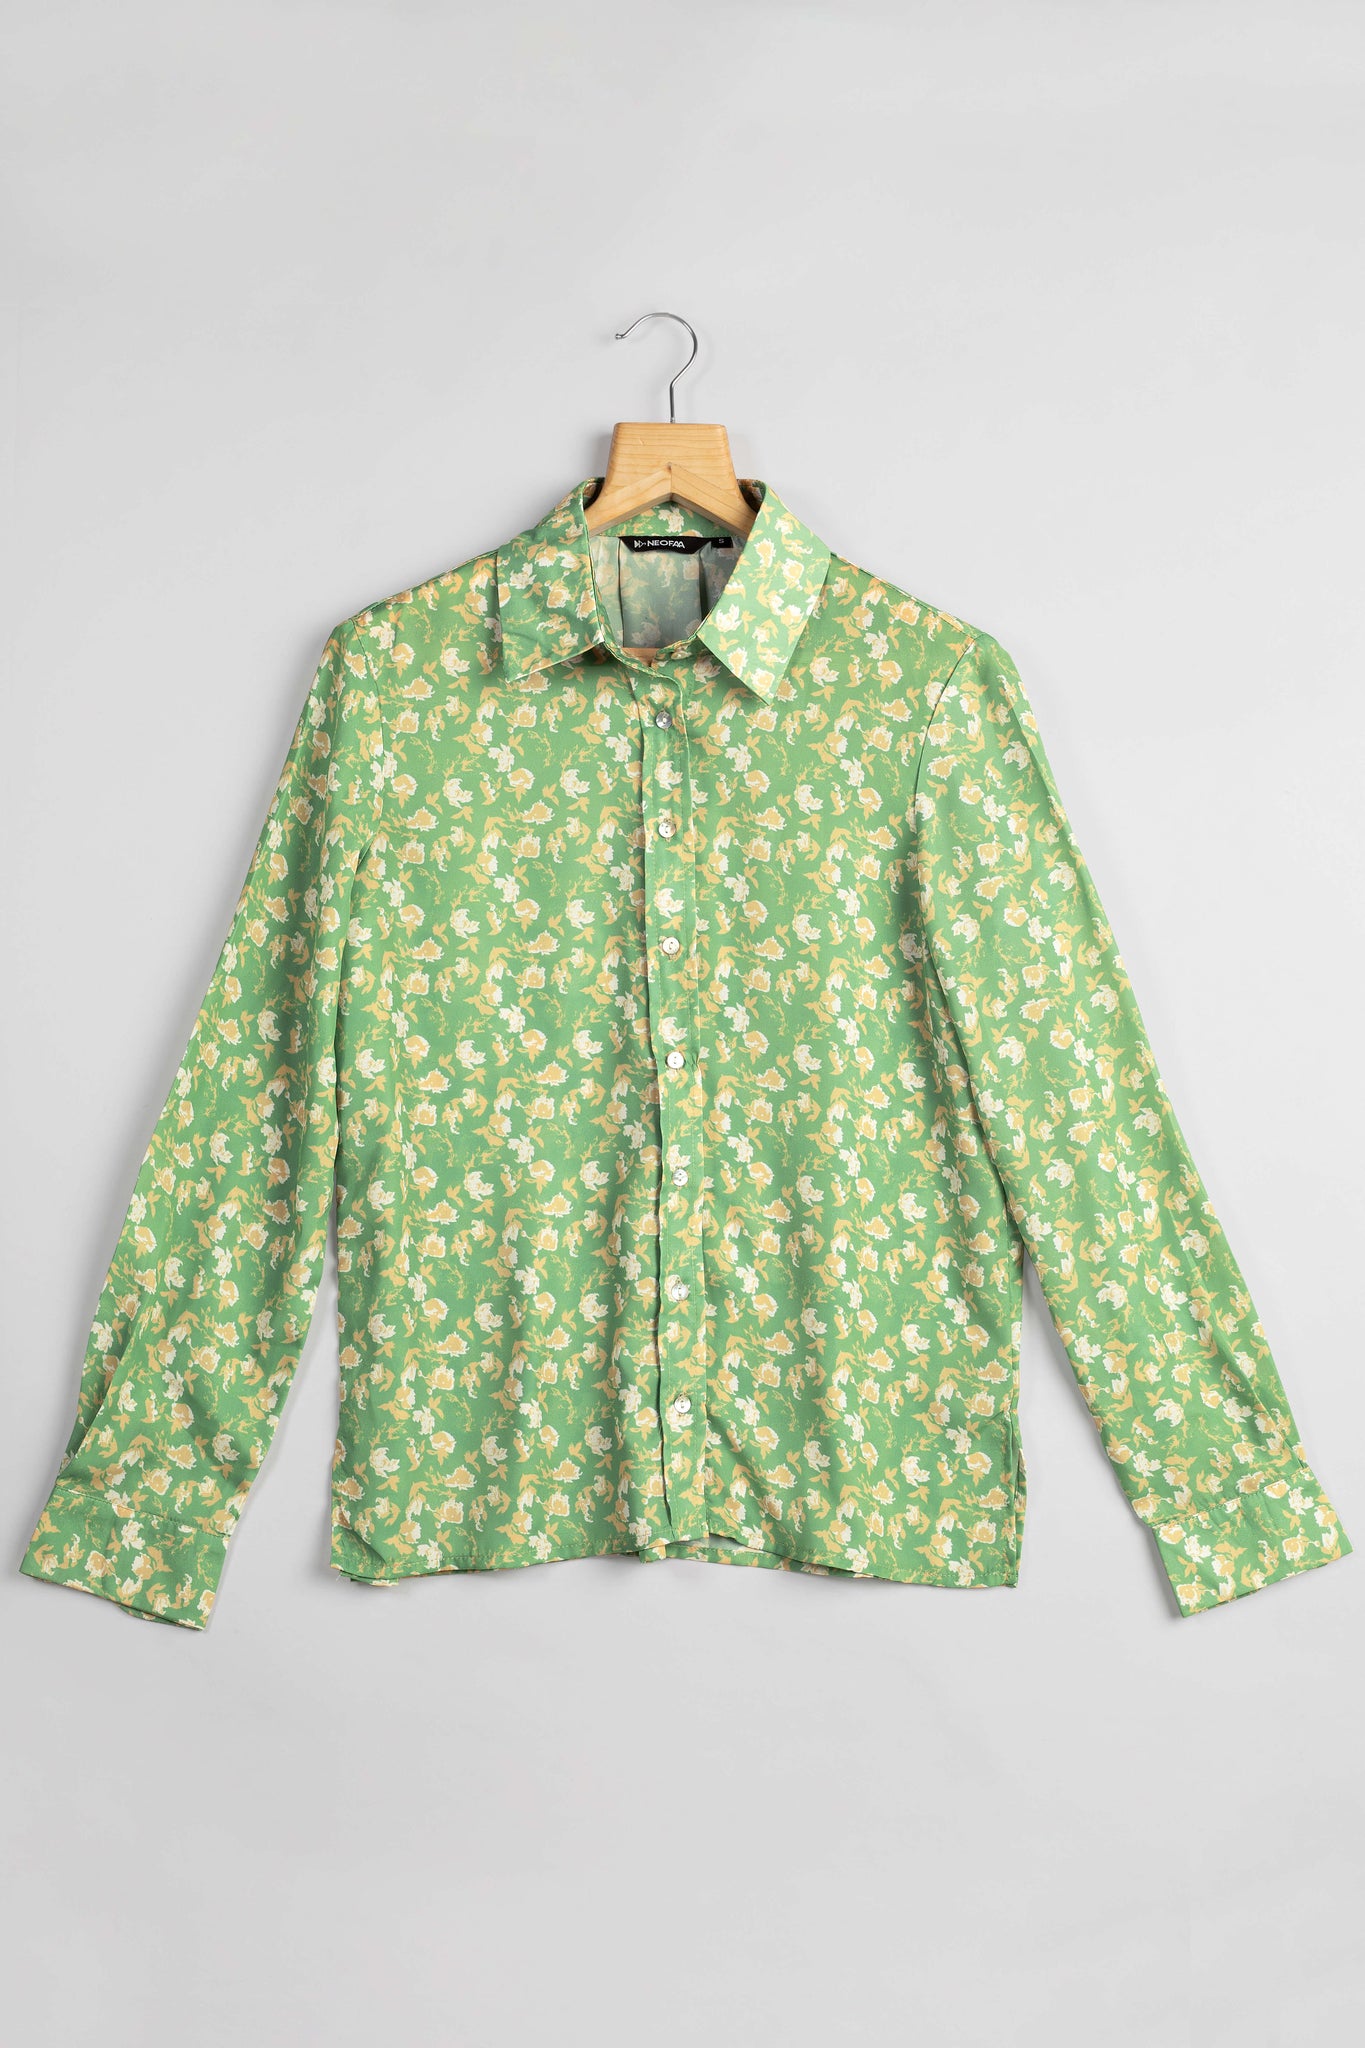 Classy Floral Shirt for Women